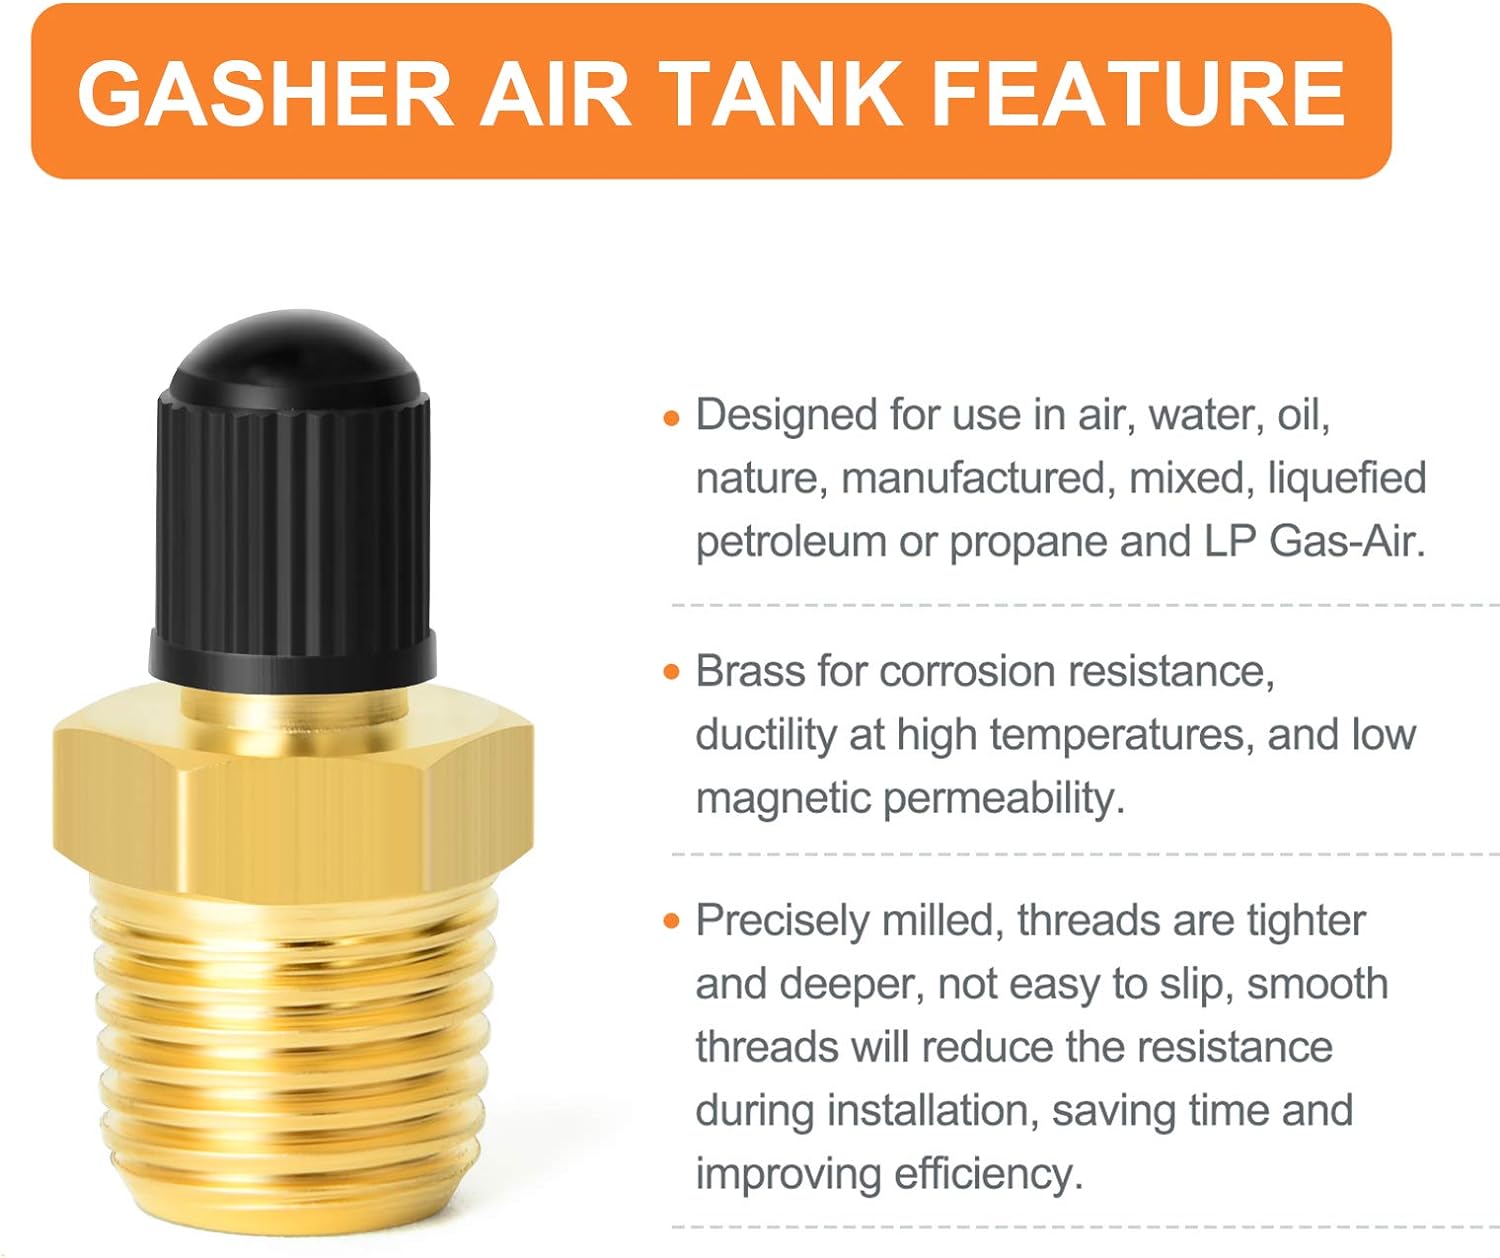 Gasher 2PCS 1/4" NPT Tank Valve Anti-Corrosion Brass Schrader Valve with 1/4" Male NPT,Using with Air Compressor Tanks